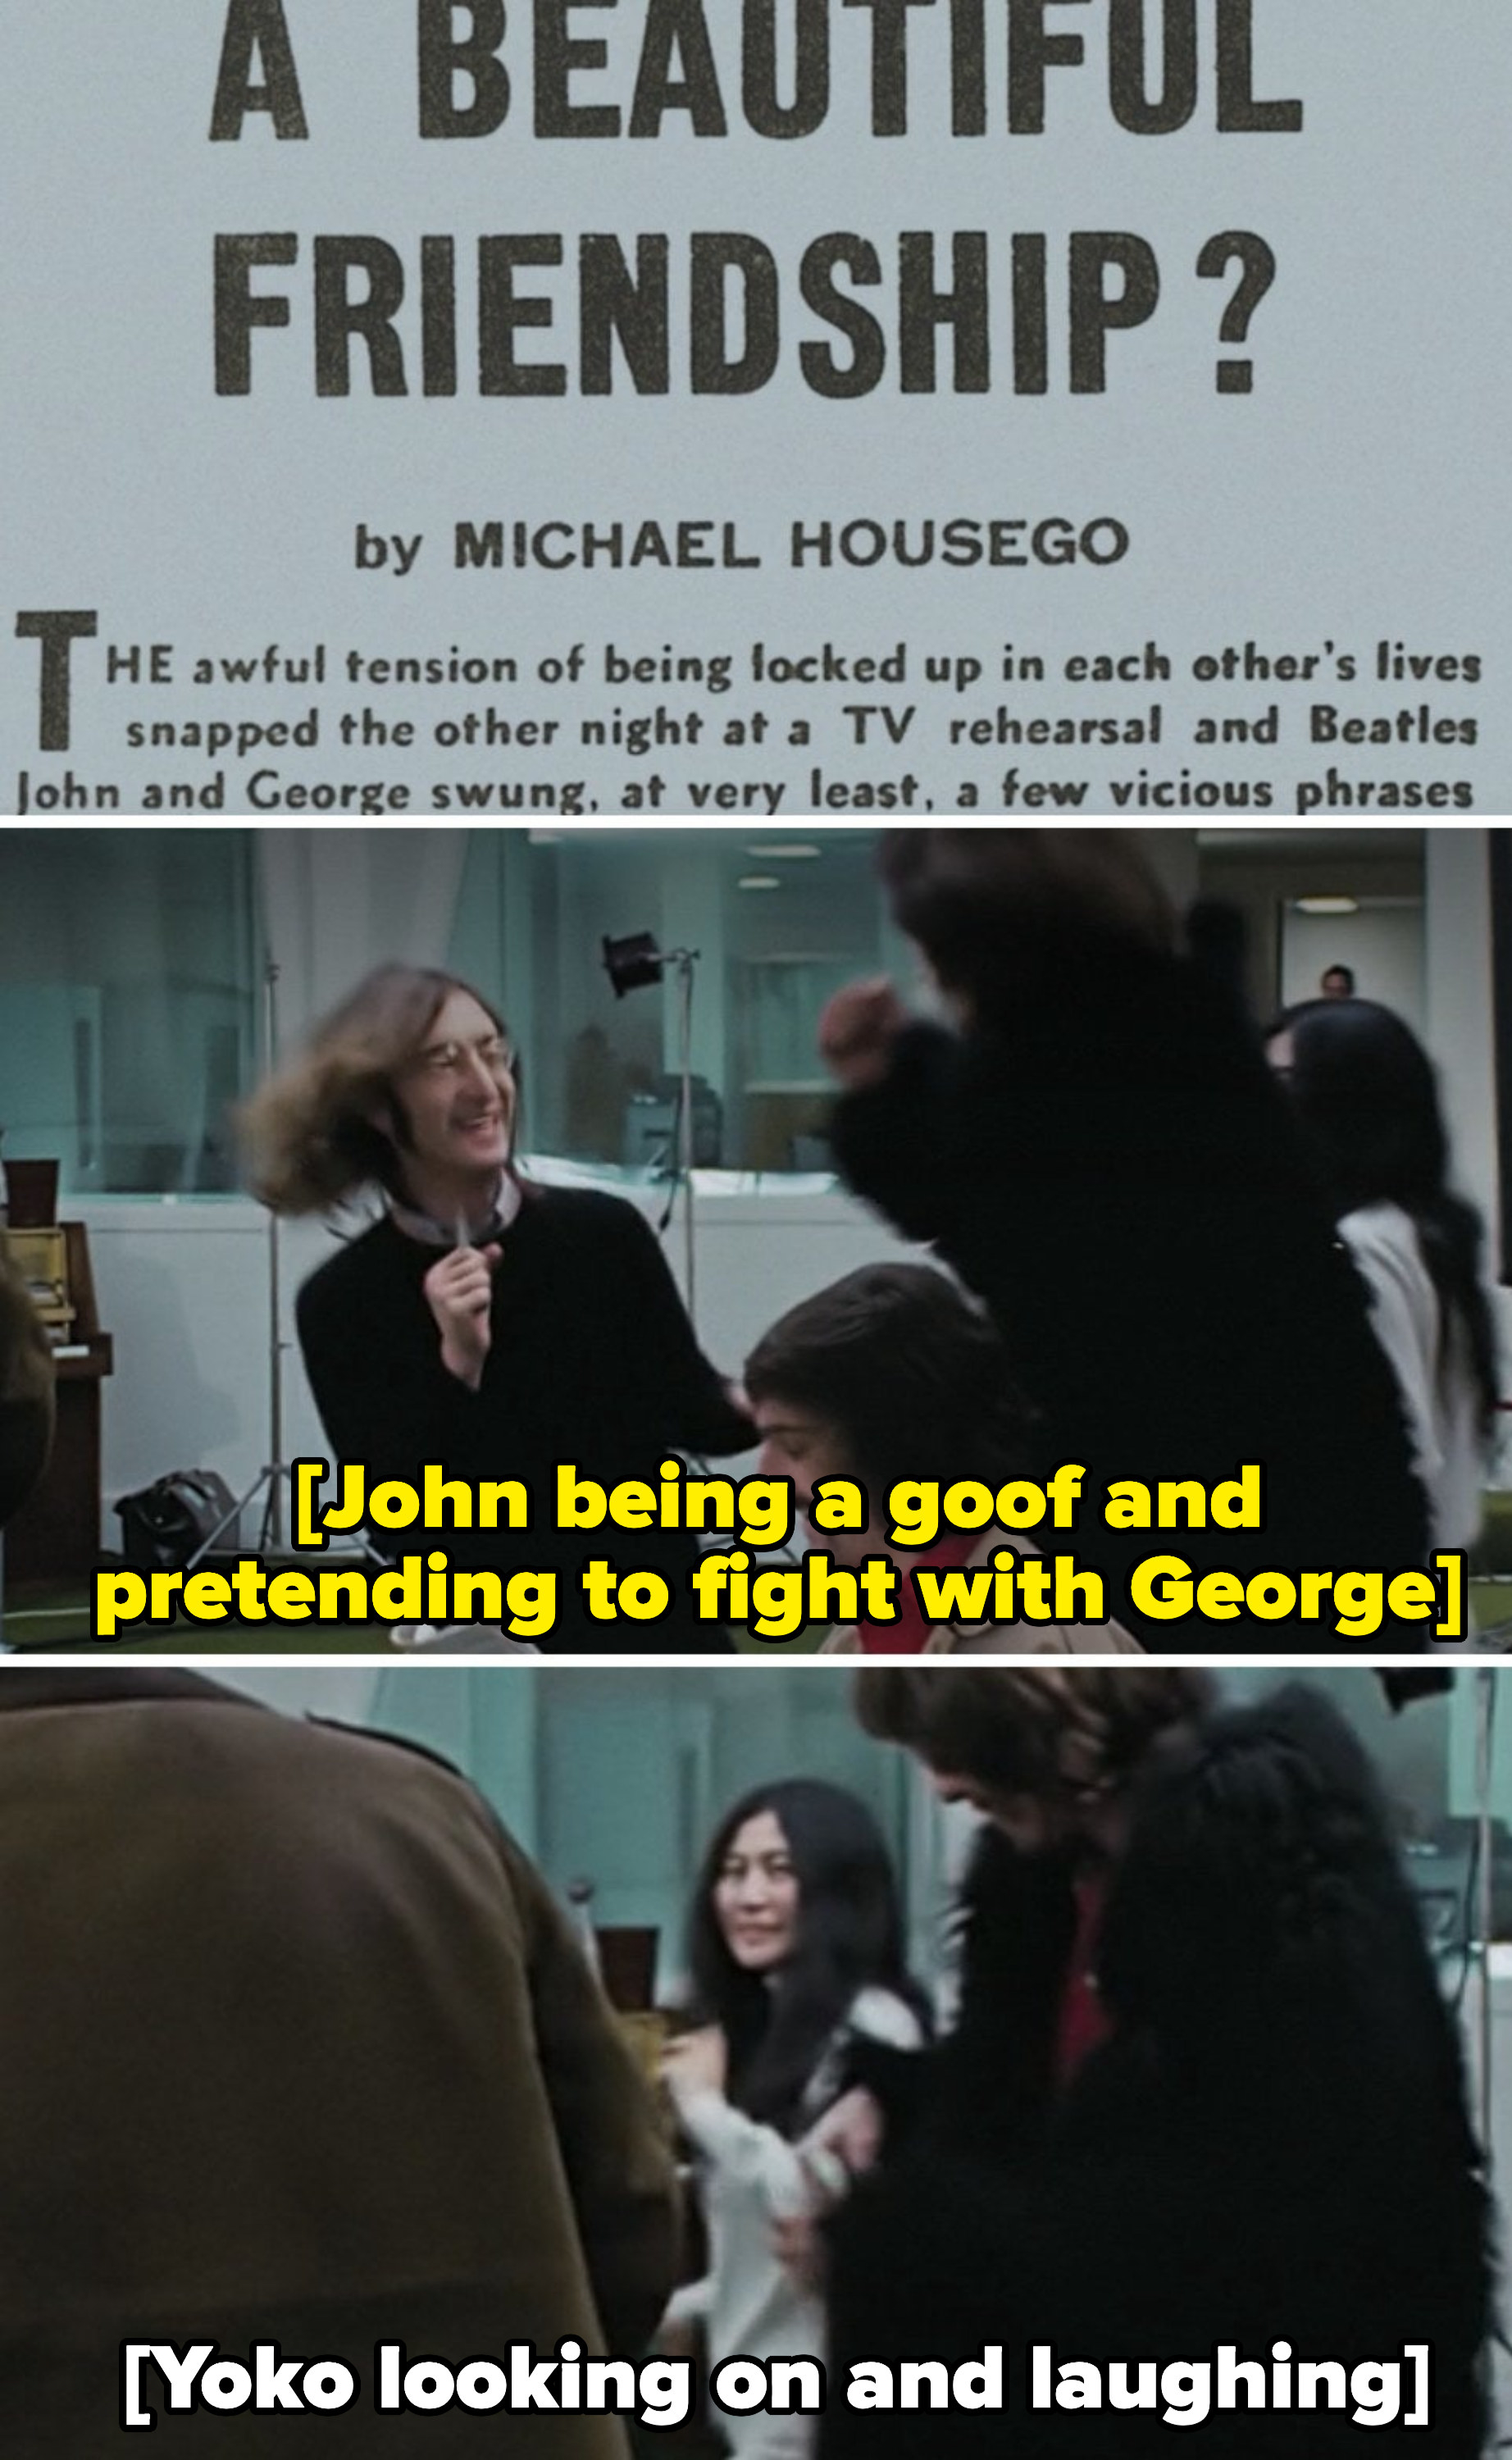 John pretending to be in a boxing fight with George while Yoko looks on with love and laughter